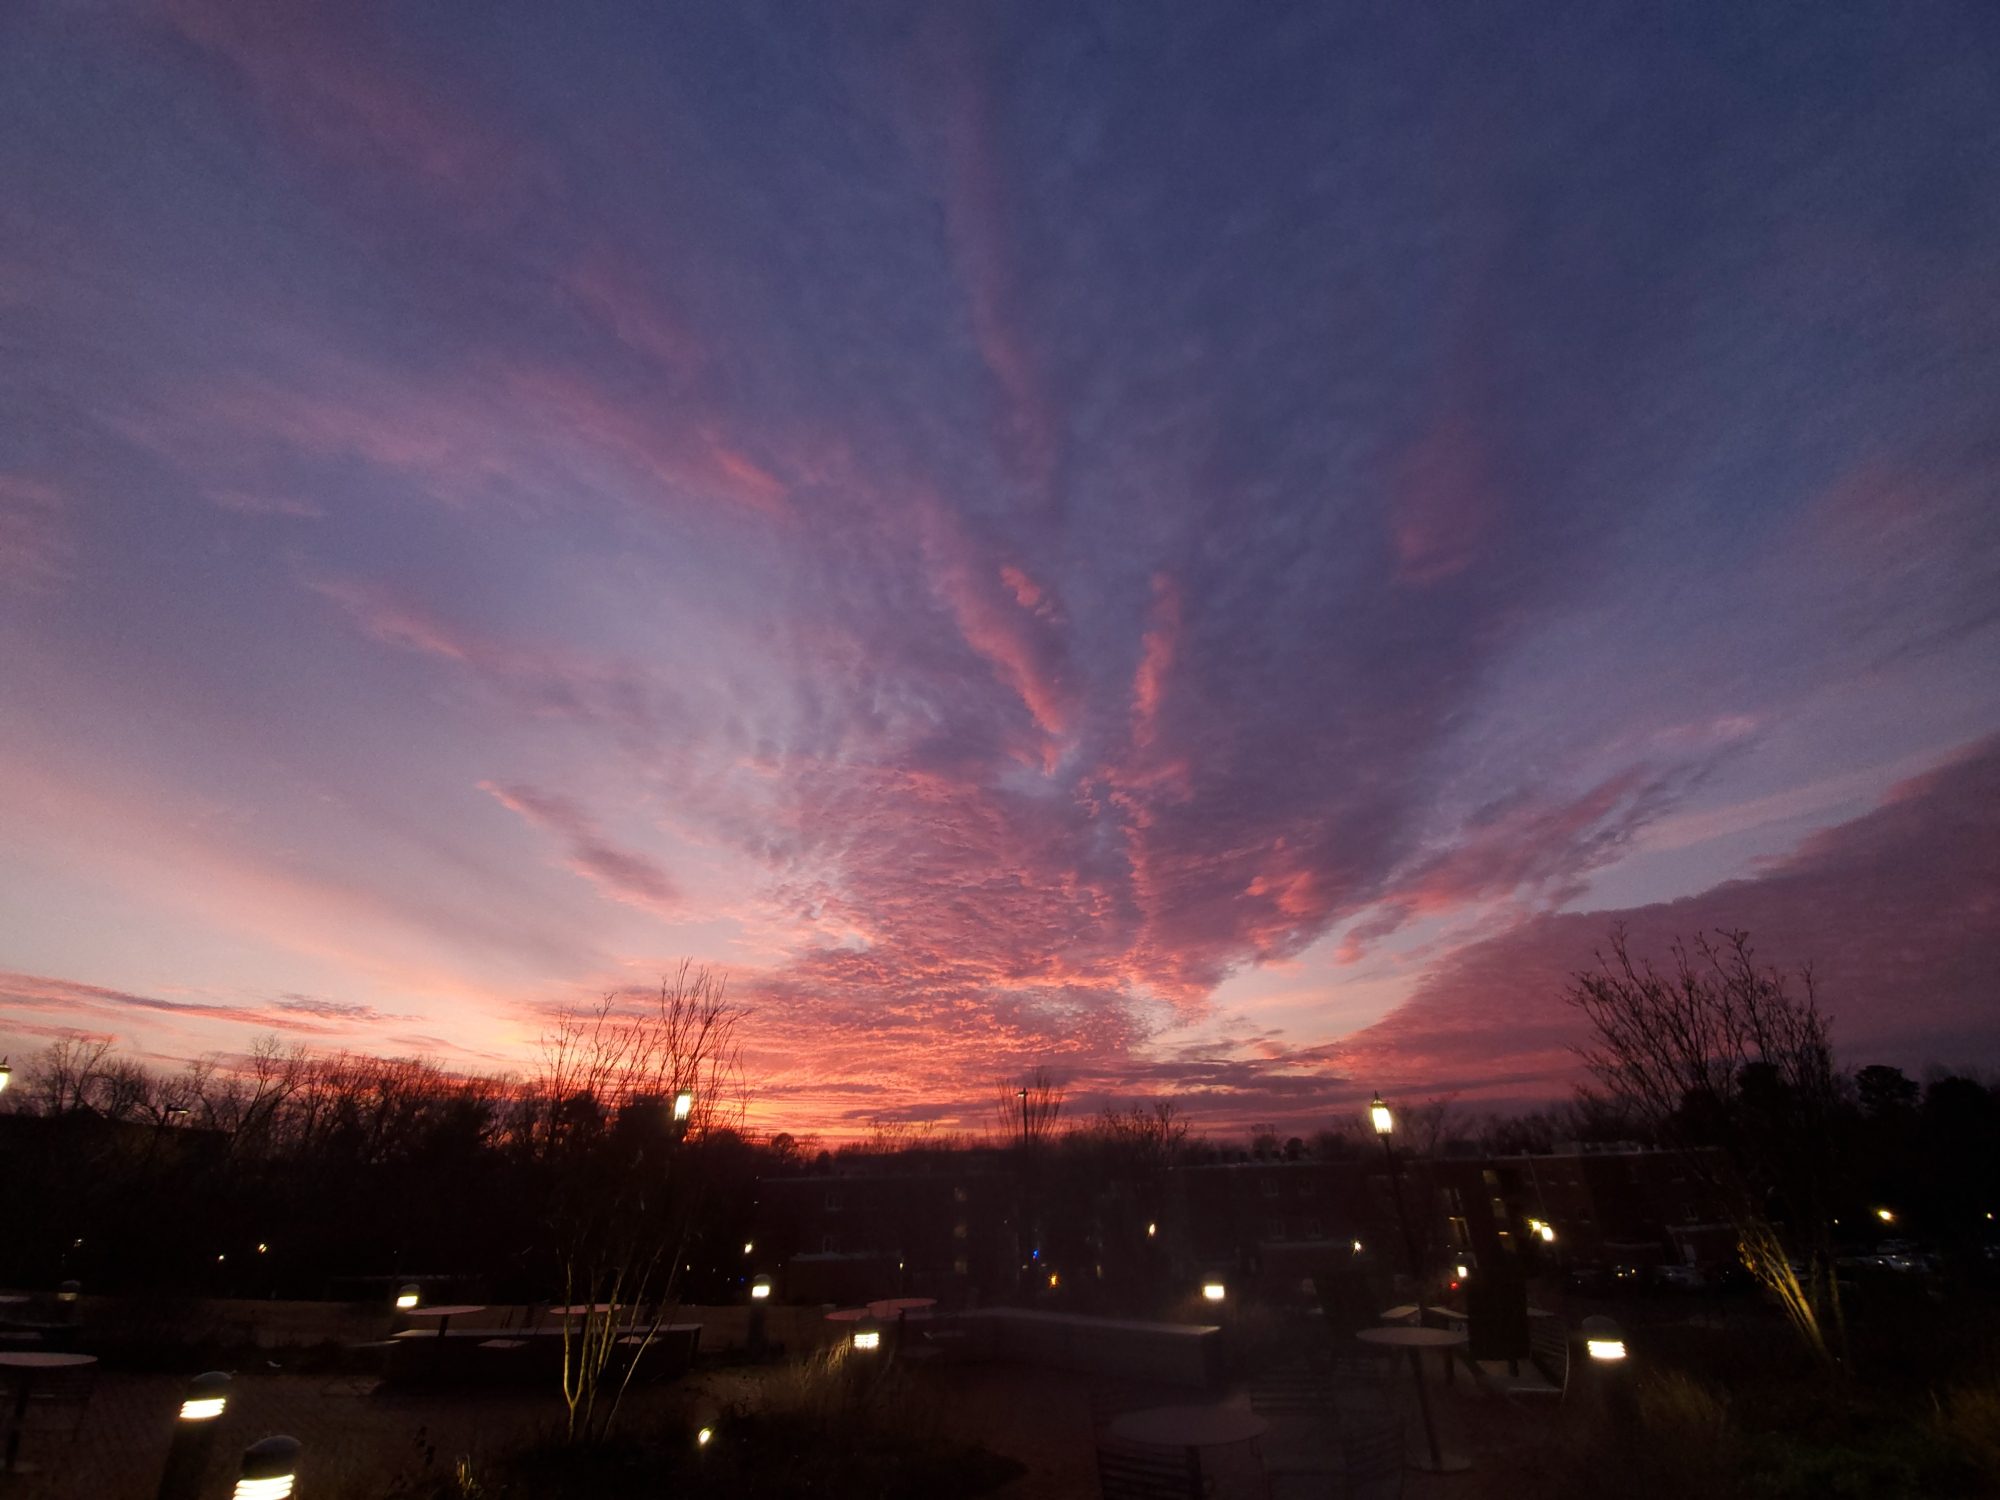 Photo from outside the Science Building taken by faculty member Ritchie Dudley